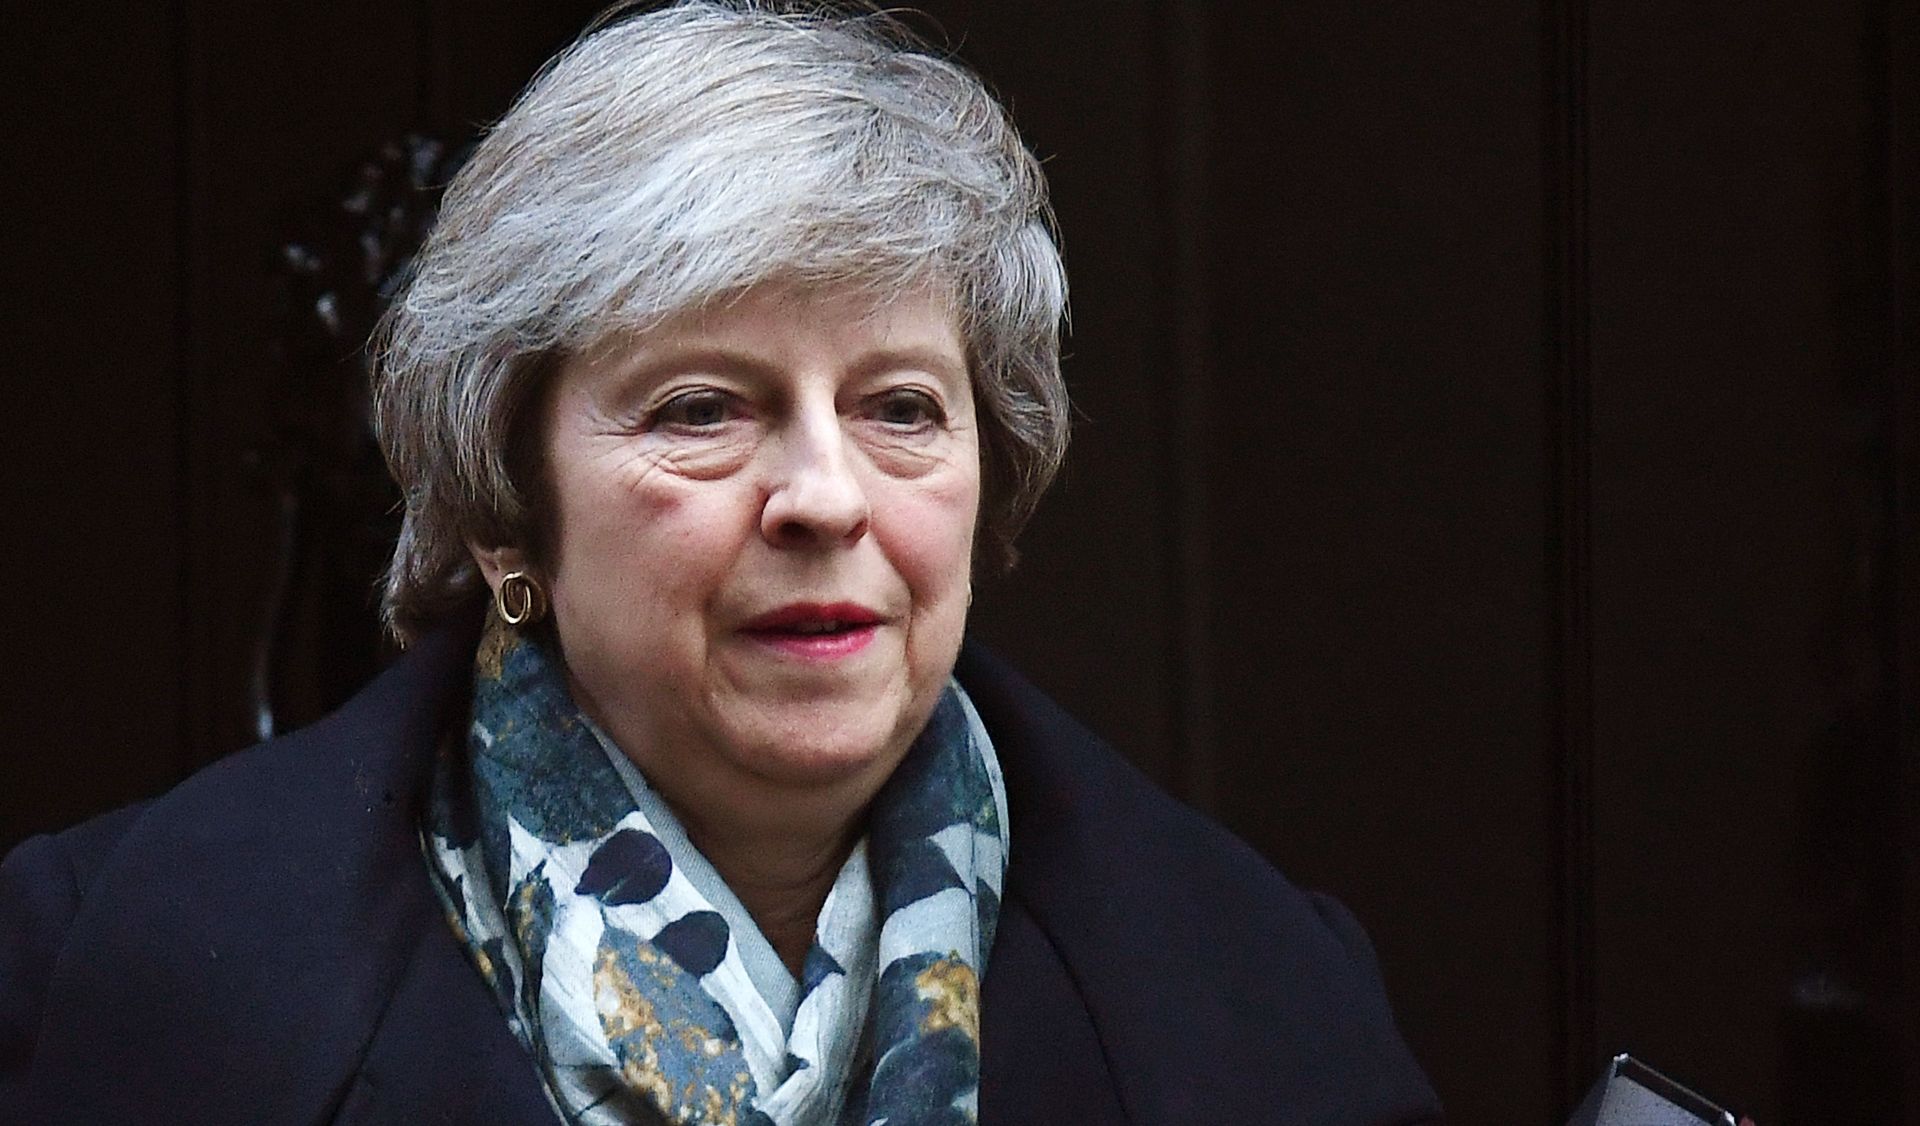 epa07237390 British Prime Minister Theresa May departs 10 Downing Street in London, Britain, 17 December 2018. British Prime Minister Theresa May is set to make a statement in the Commons on Brexit, ruling out a new referendum.  EPA/ANDY RAIN